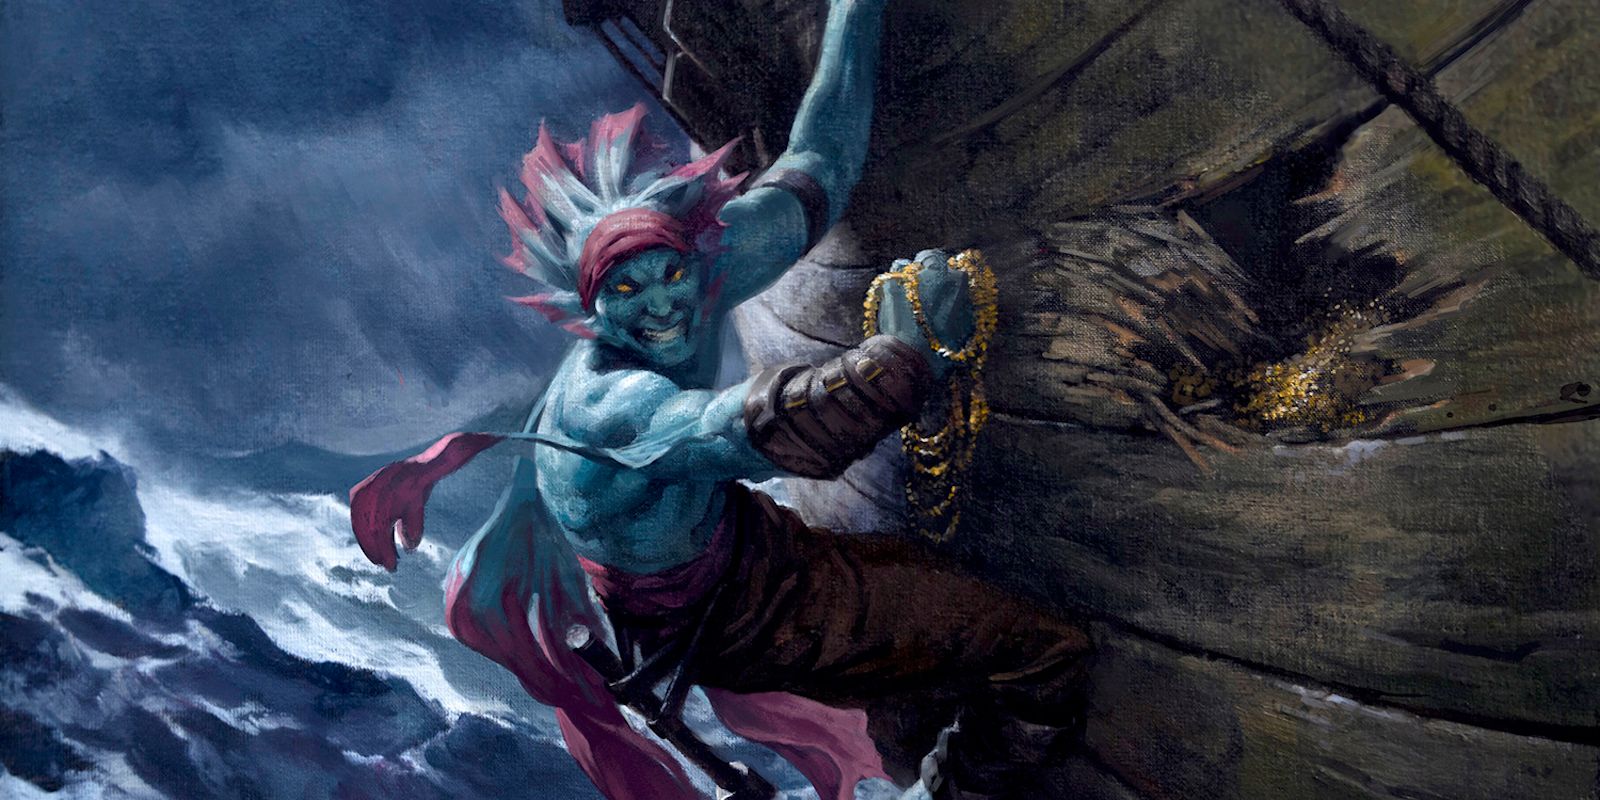 A Merfolk pirate reaching into the hull of a cracked ship to grab some gold.